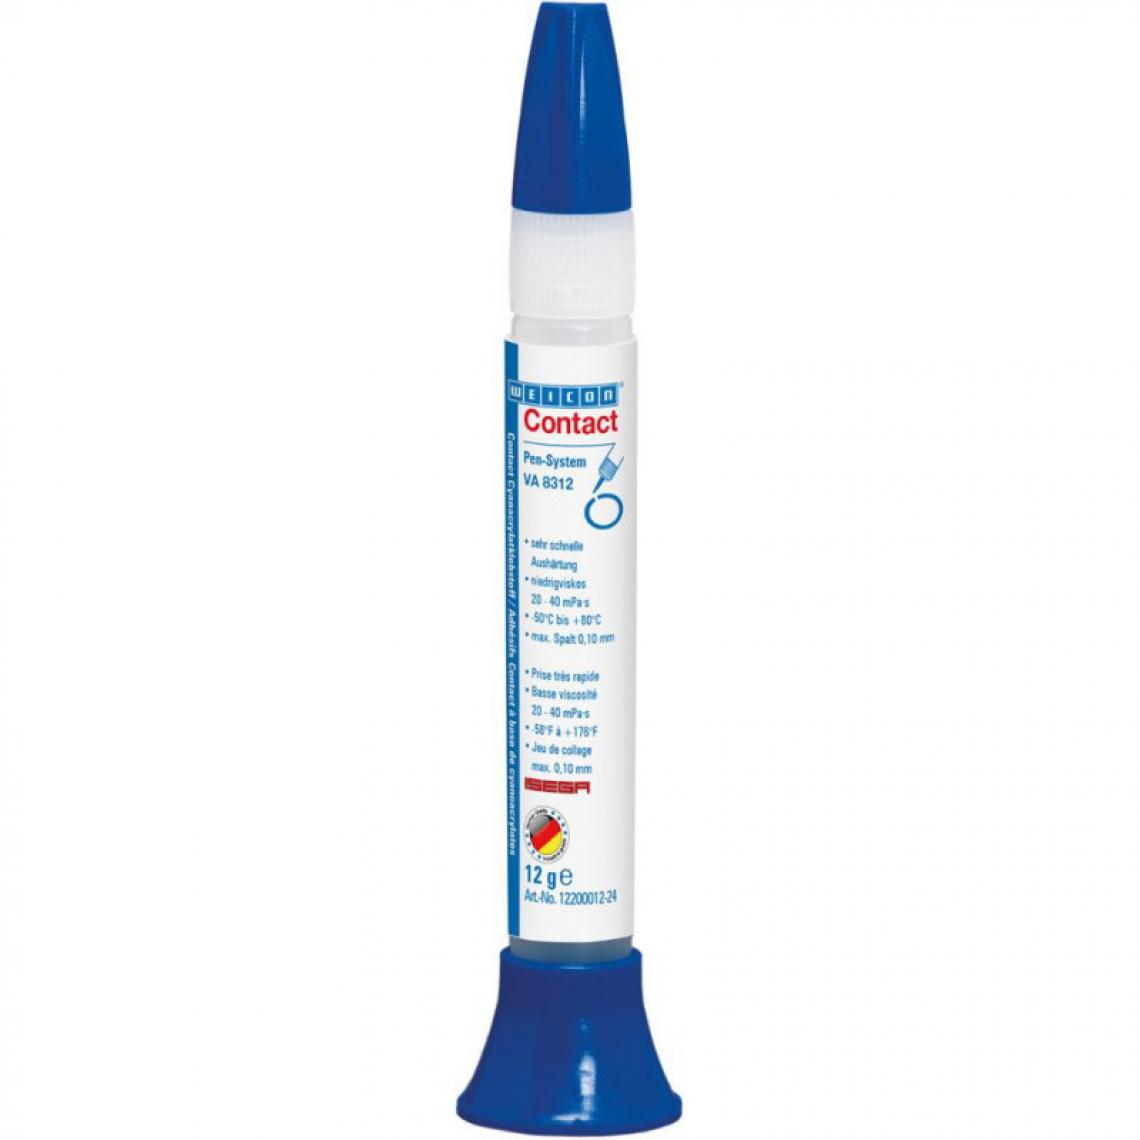 marque generique - Colle cyanoacrylate VA 8312 12 g Pen-System Weicon (Par 30) - Mastic, silicone, joint